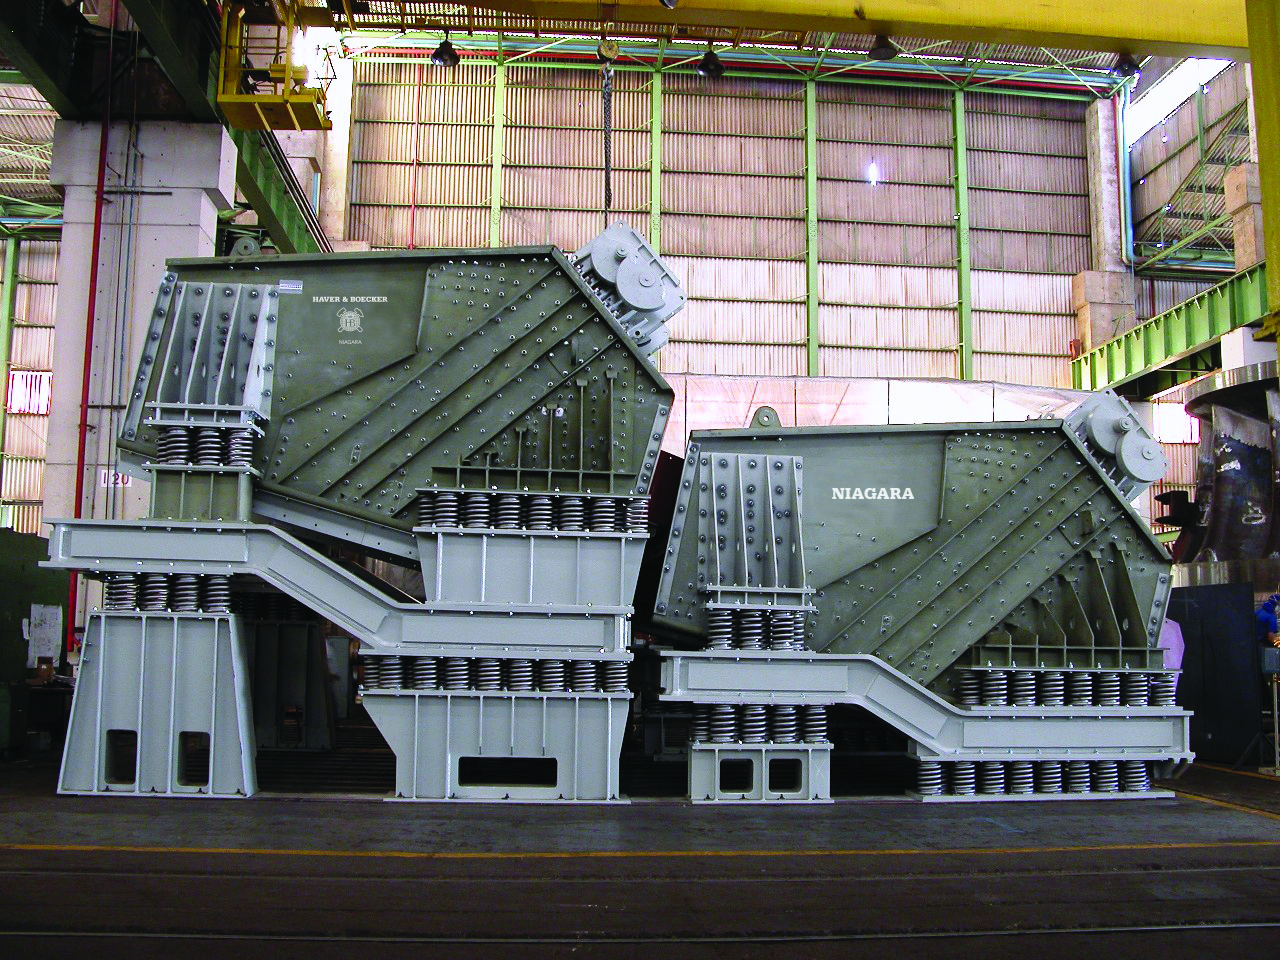 Produce Up To 15,000 Tons Per Hour With The Niagara XL-Class Vibrating Screen